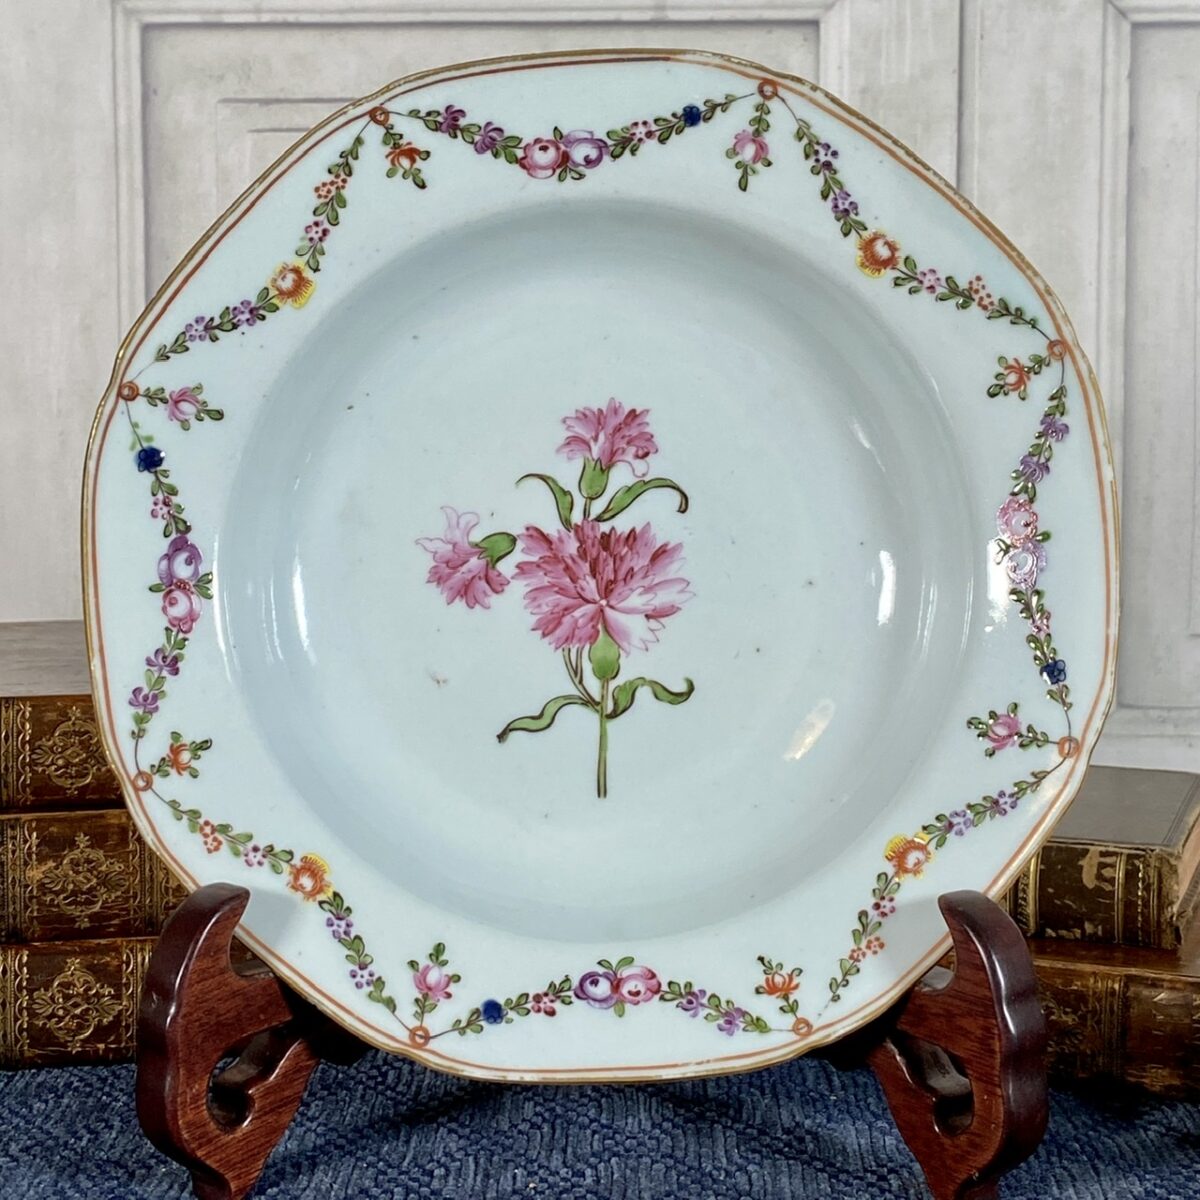 Chinese Export Porcelain Plate with Carnations. (b)